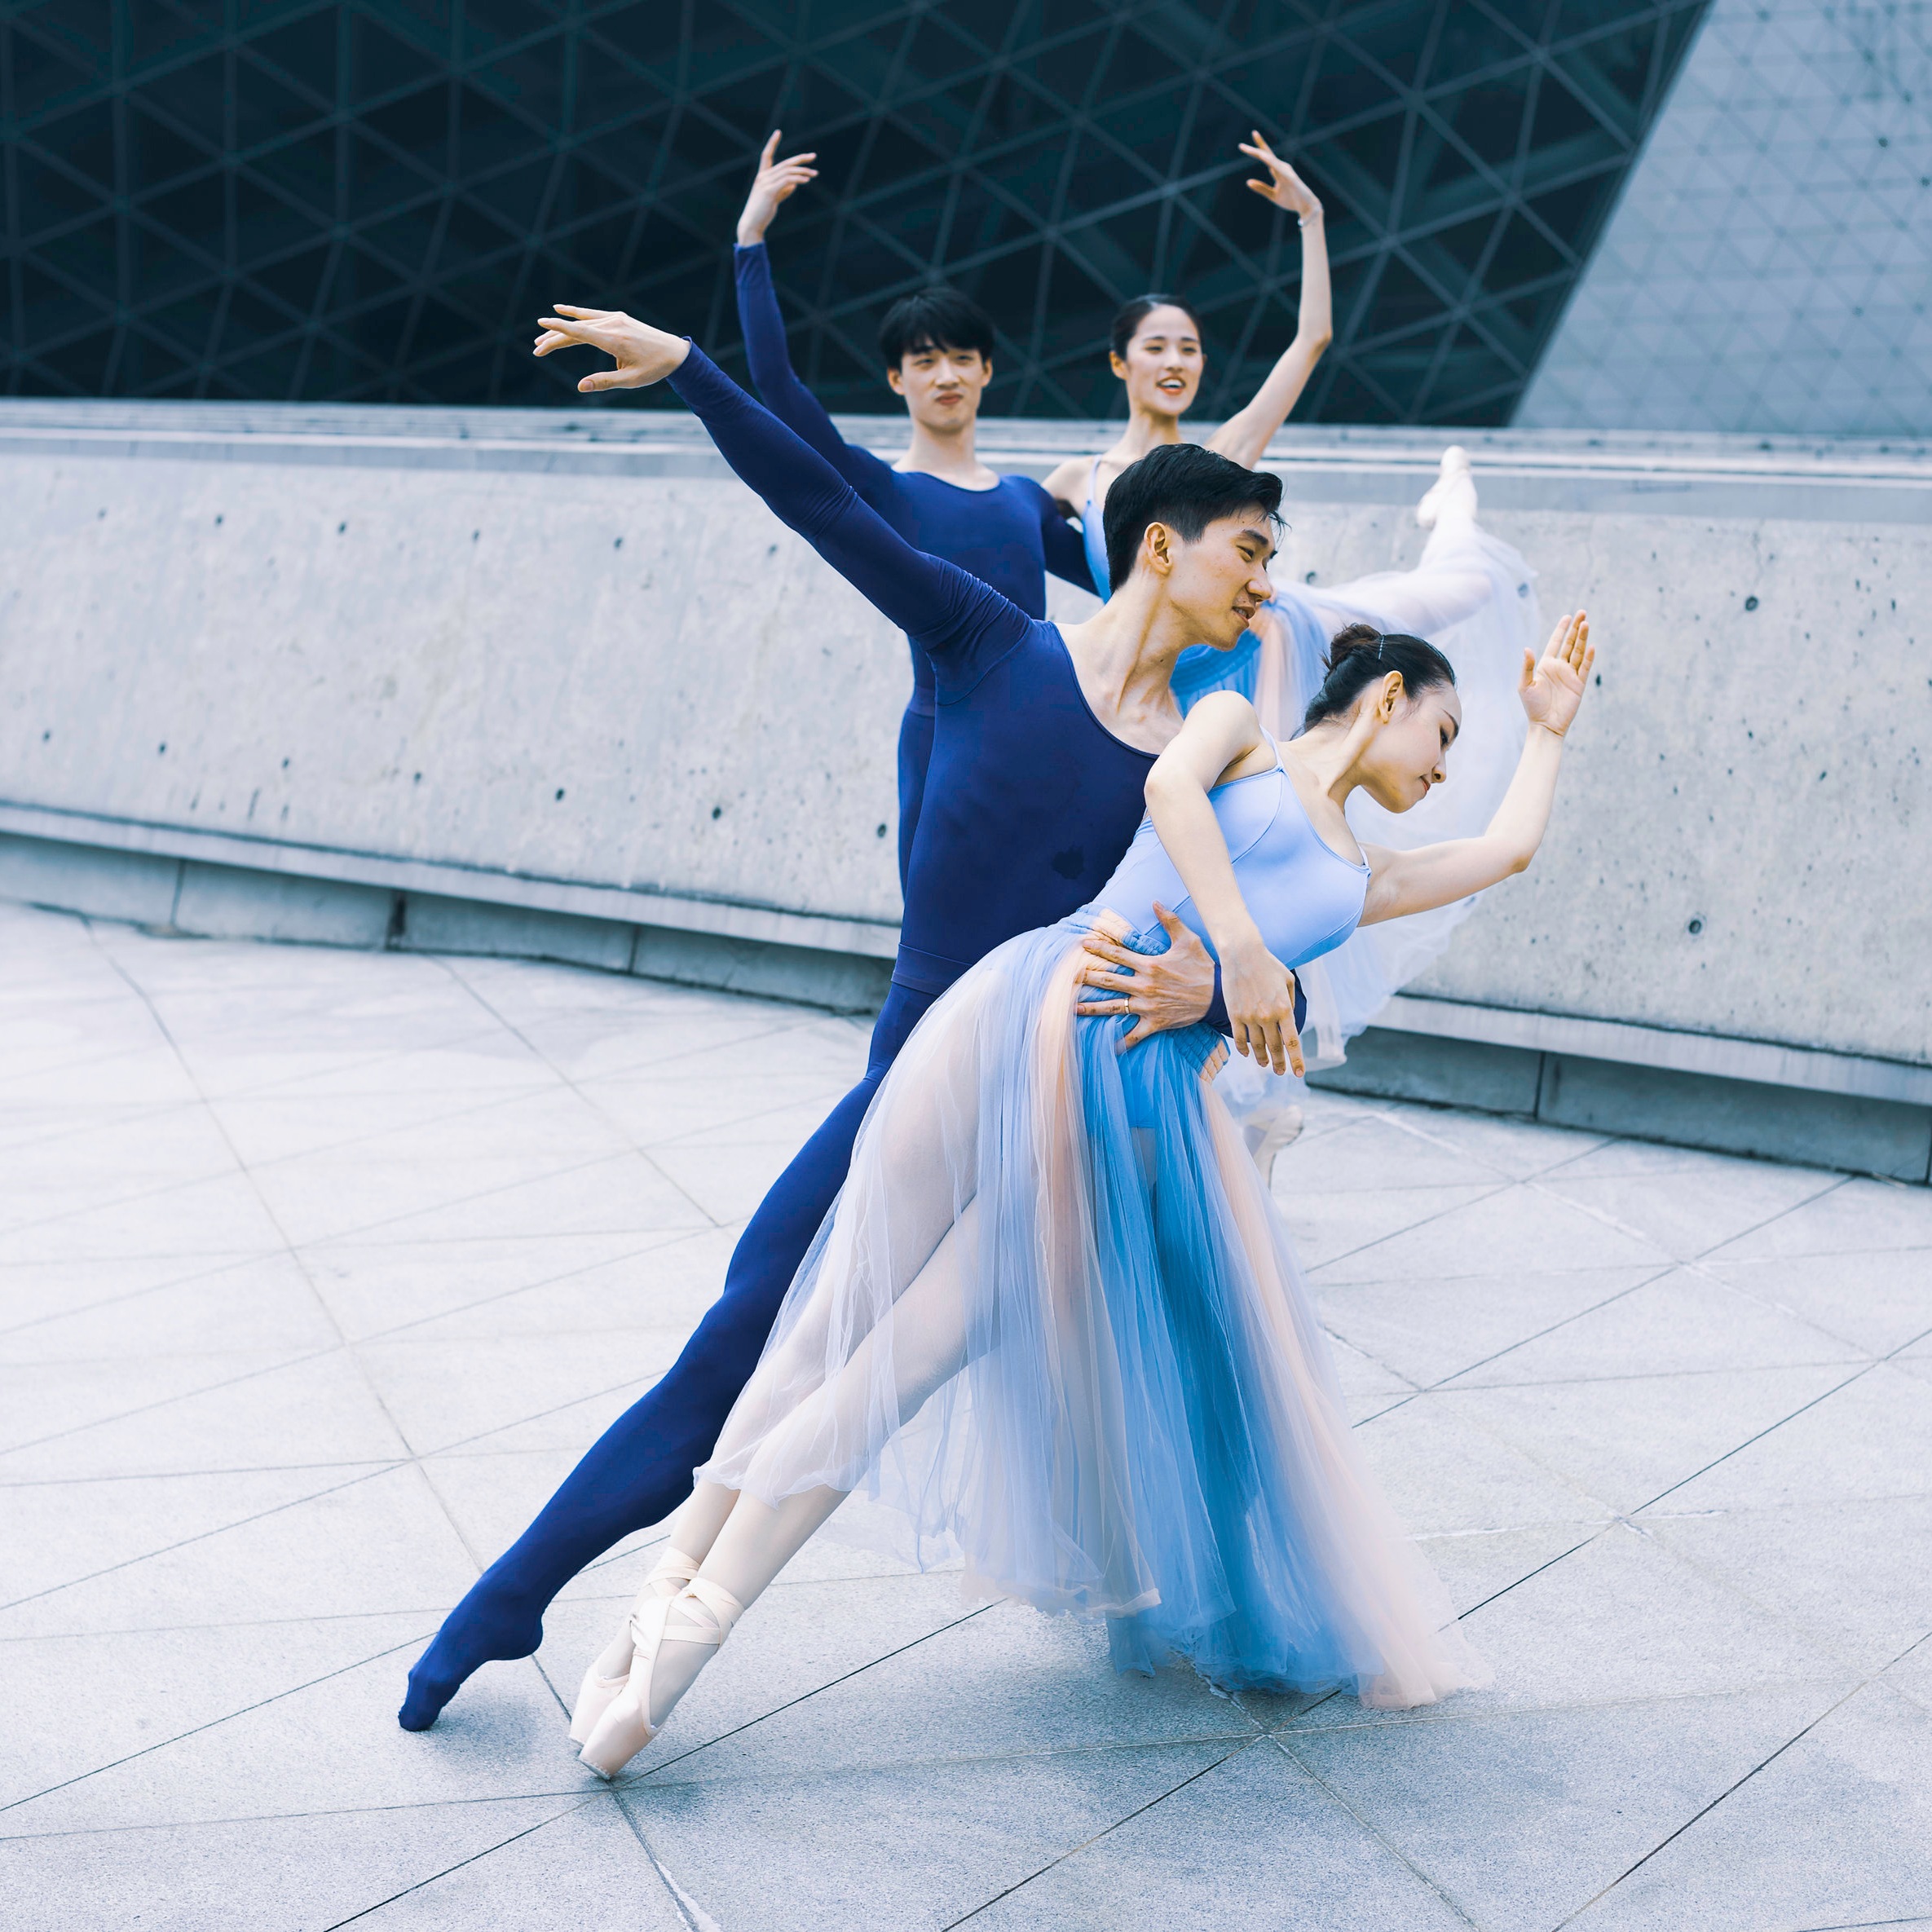 Behind the Curtain Gender Stereotyping in the Ballet World — Big World, Tiny Dancer